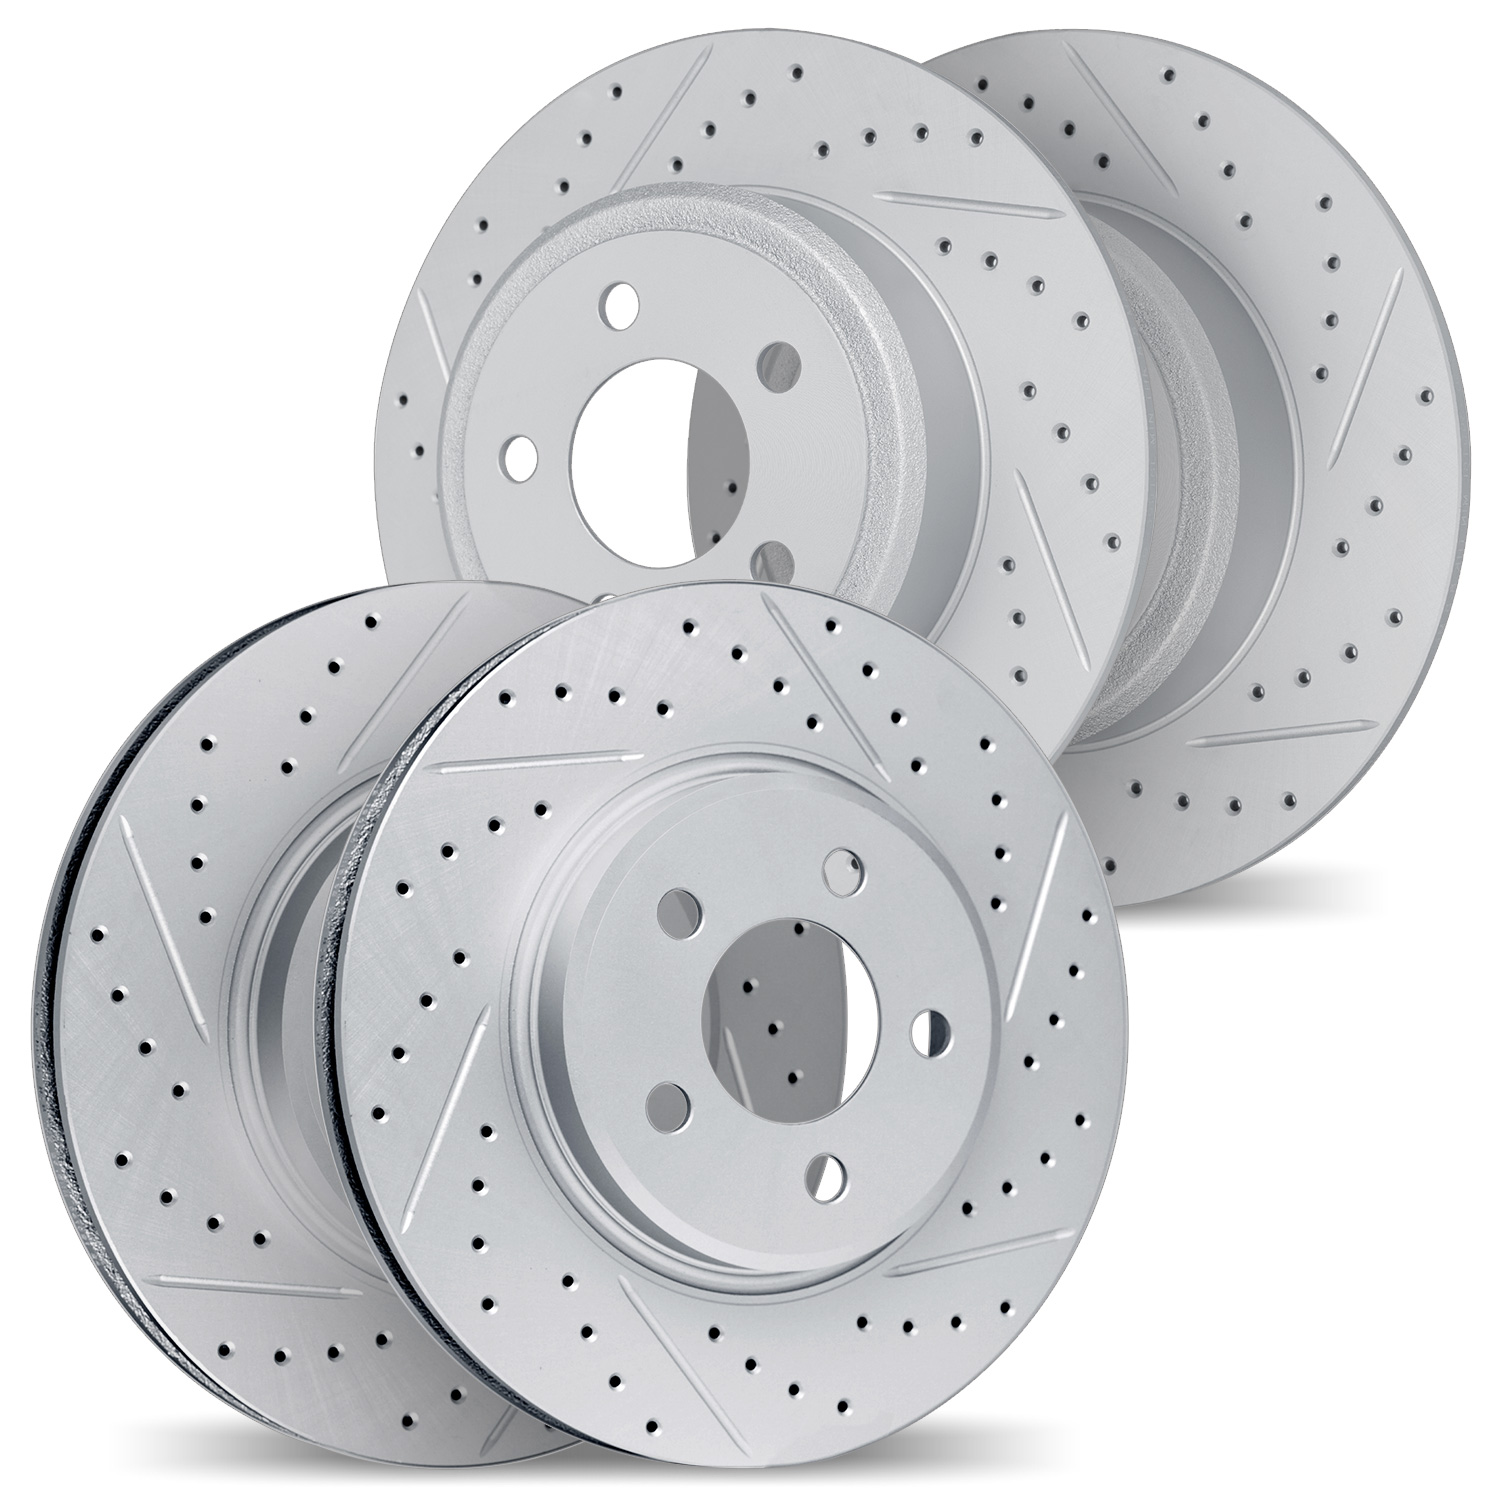 2004-59003 Geoperformance Drilled/Slotted Brake Rotors, 2006-2015 Acura/Honda, Position: Front and Rear